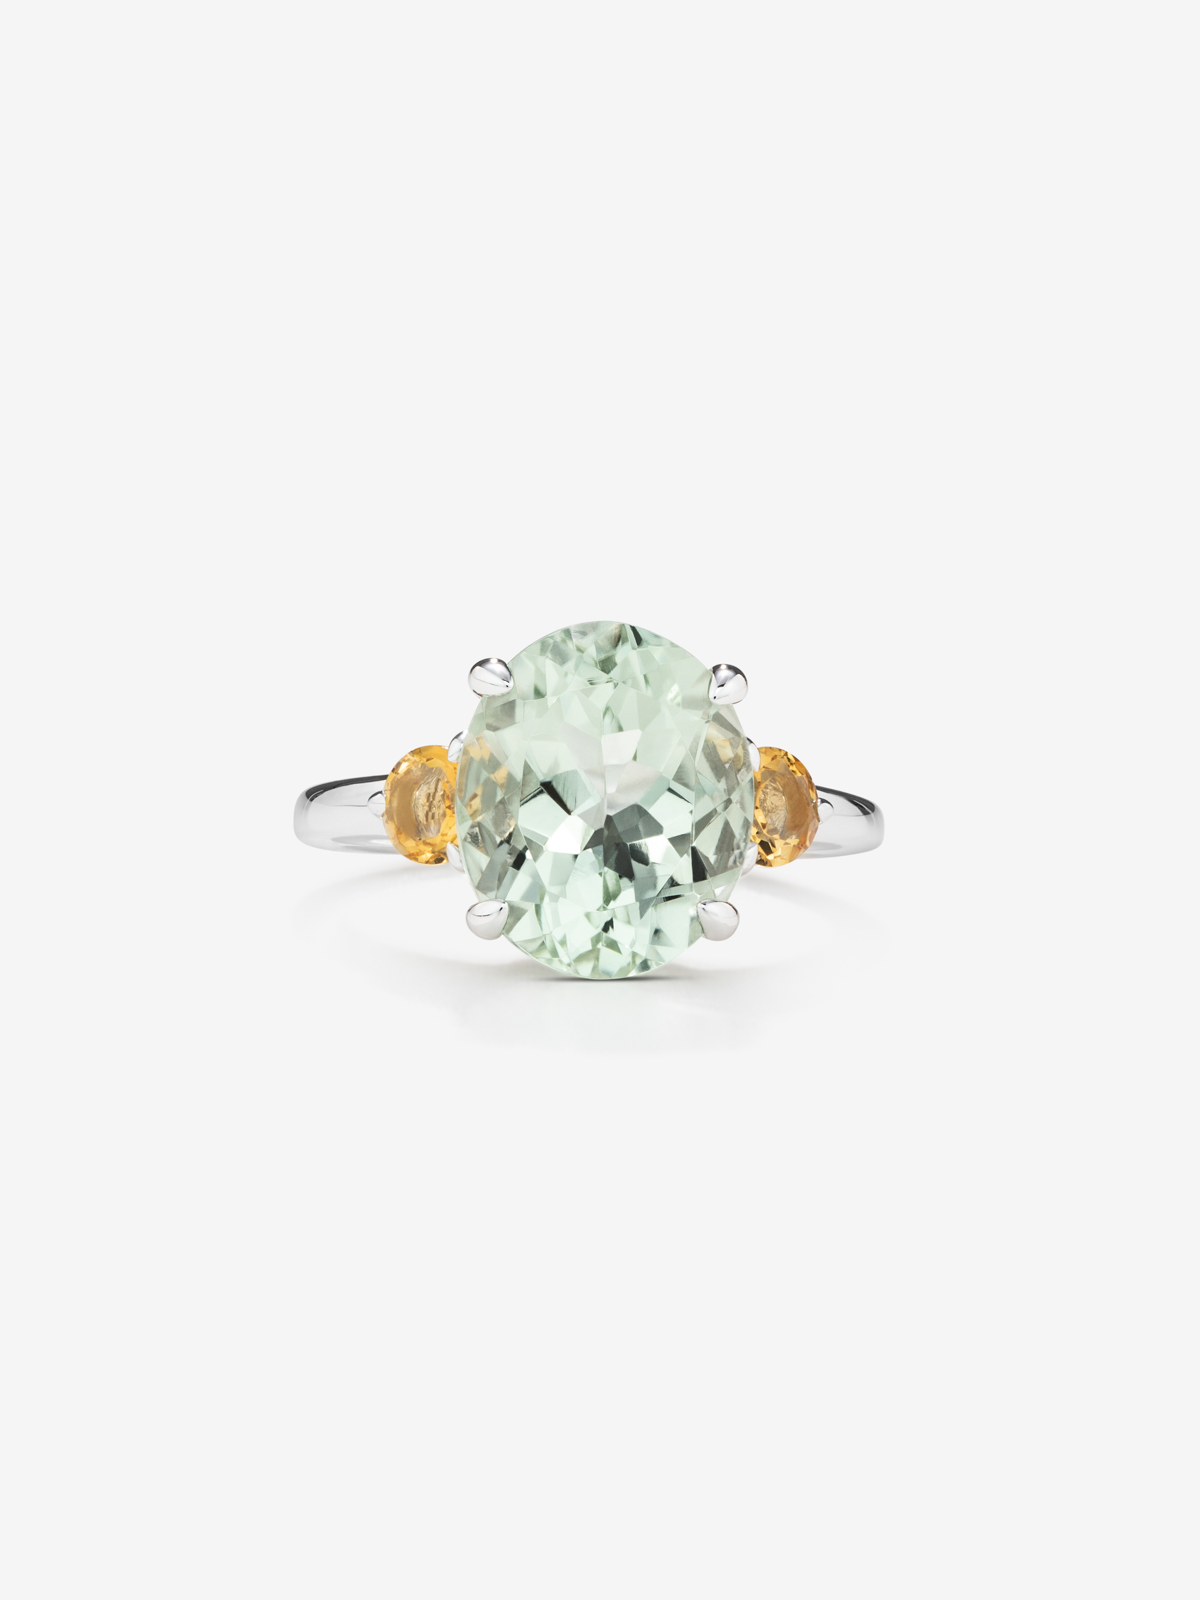 925 Silver Tieinillo Ring with Oval Green Amatista of 4.55 CTS and Citrin Quarters in Blind Size of 0.46 CTS